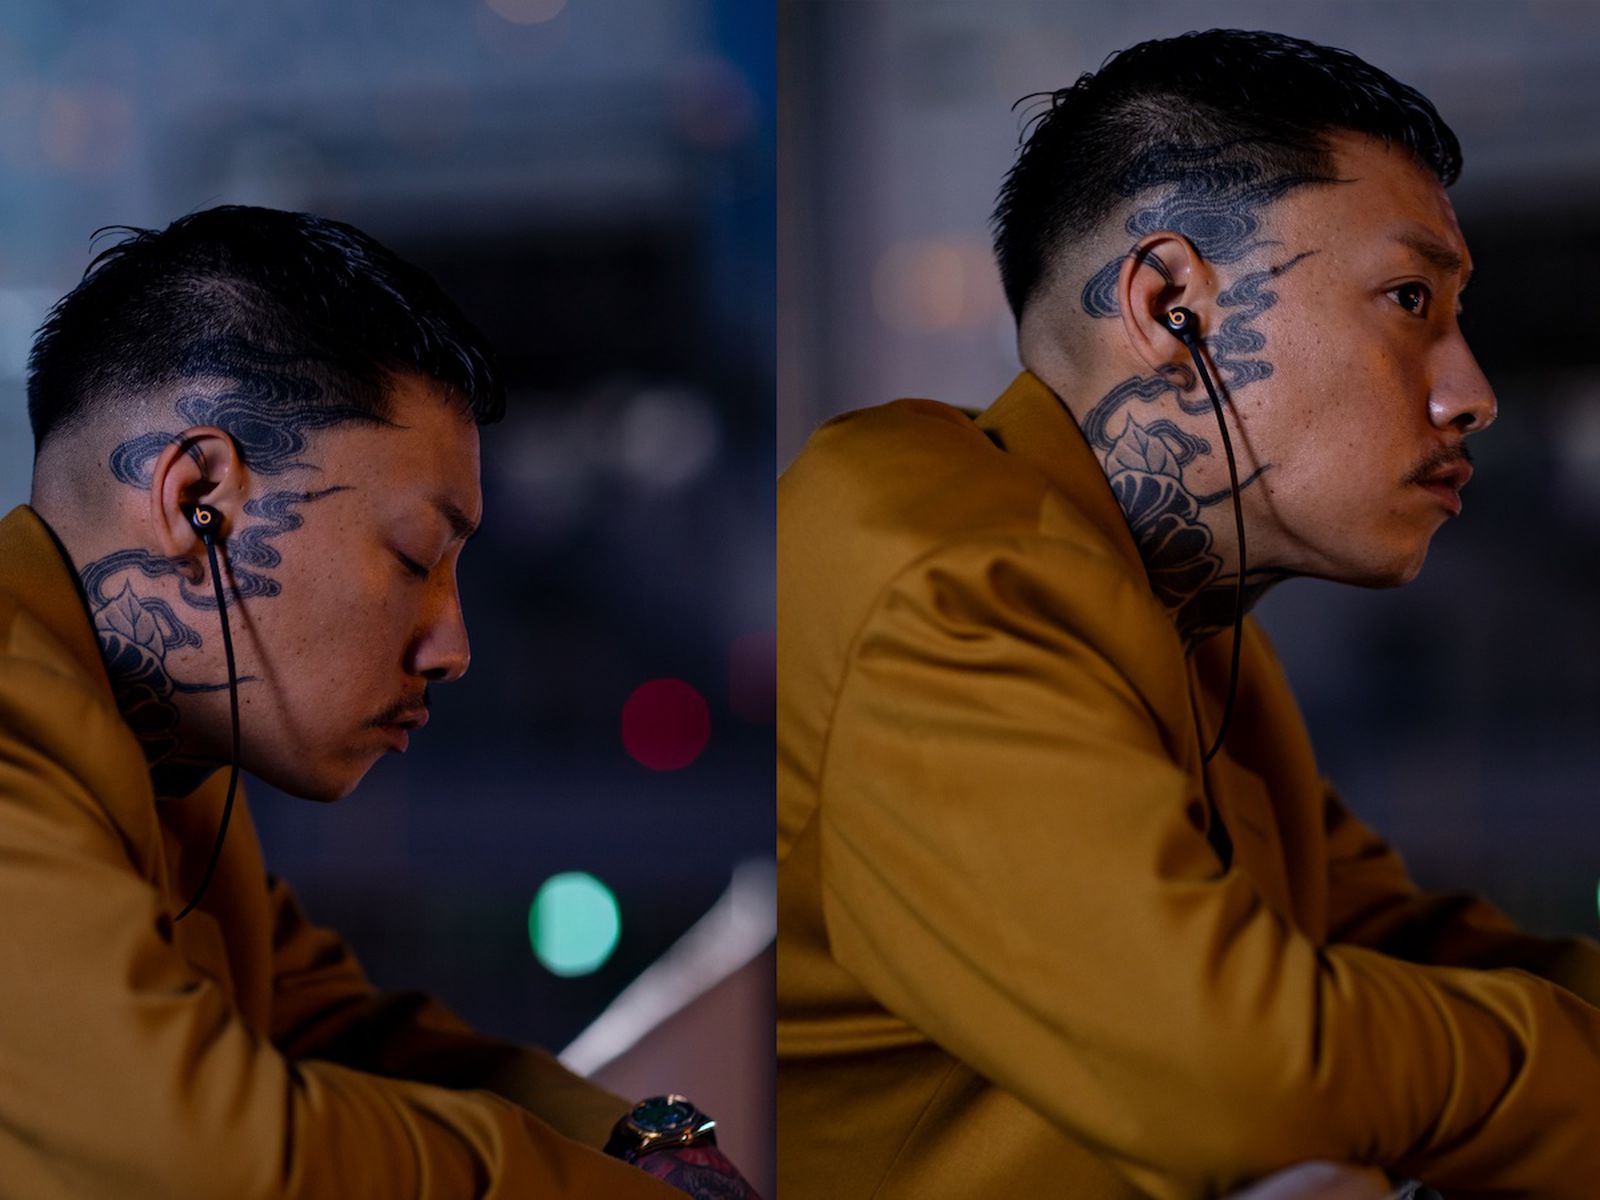 Beats Flex Get a Leopard-Print Design in New Collaboration With